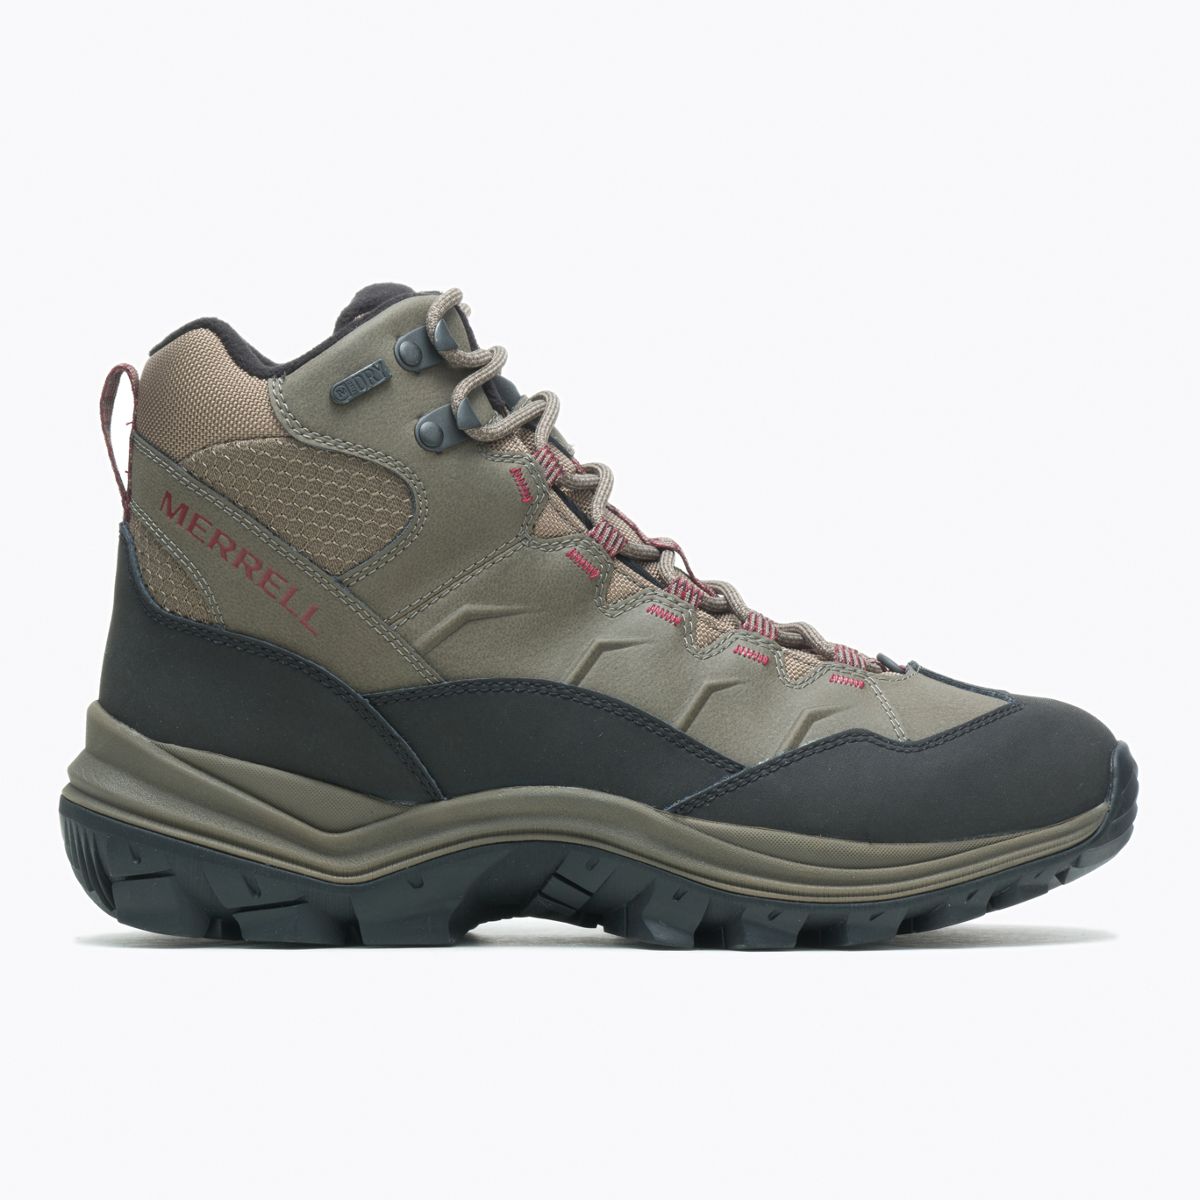 Men's Thermo Chill Mid Waterproof Boots | Merrell